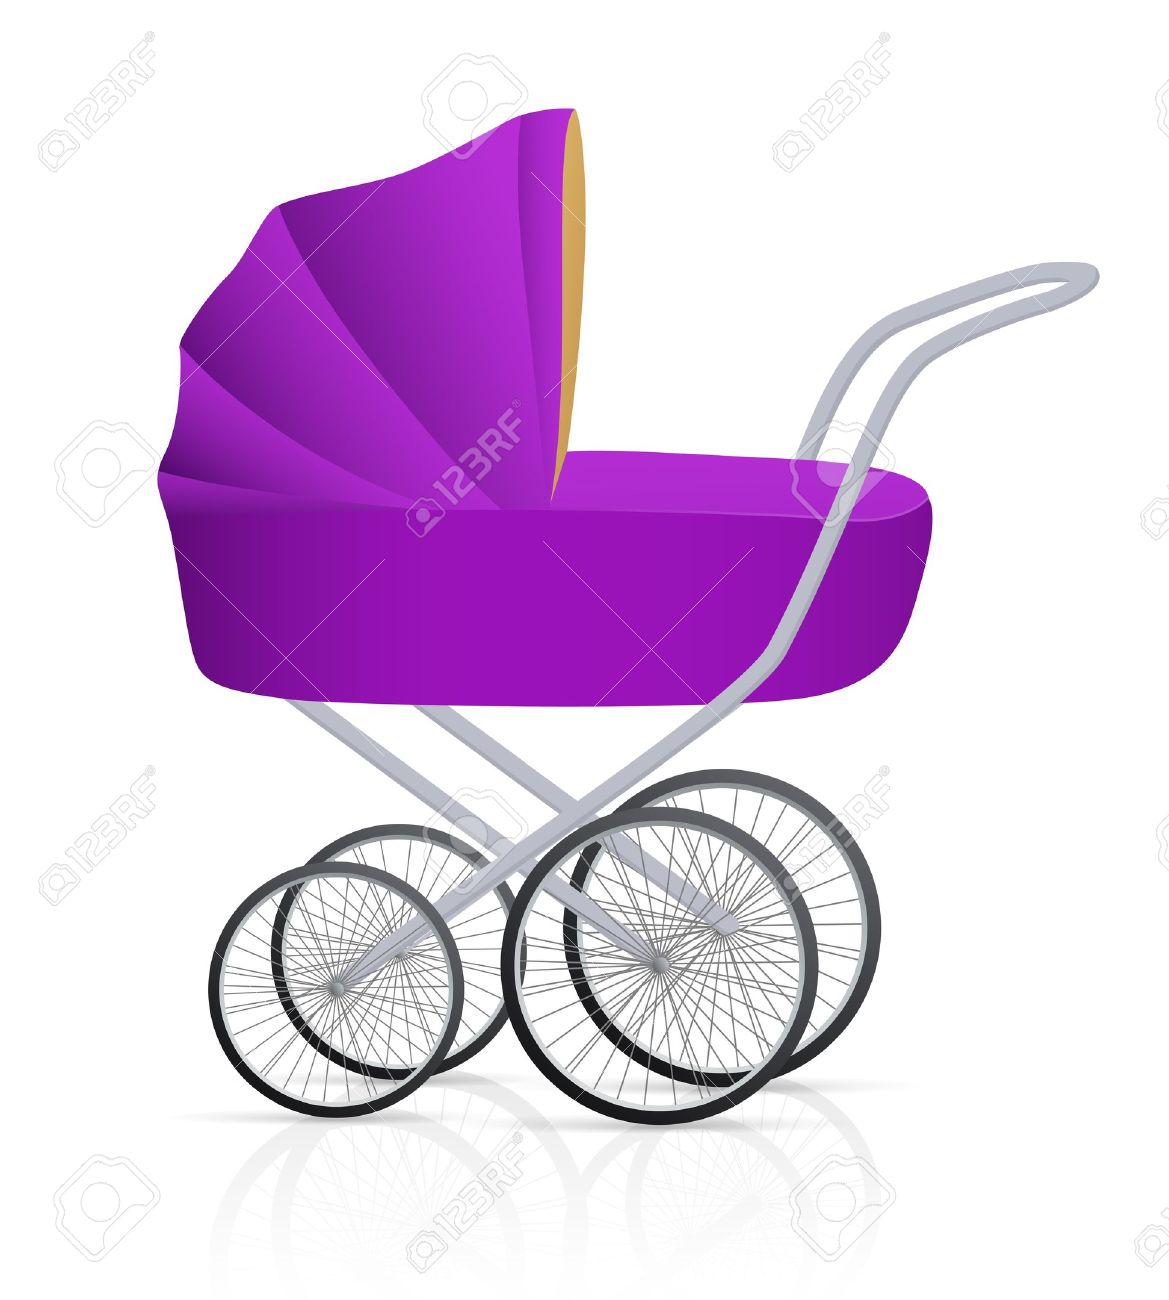 baby buggy clipart - photo #46